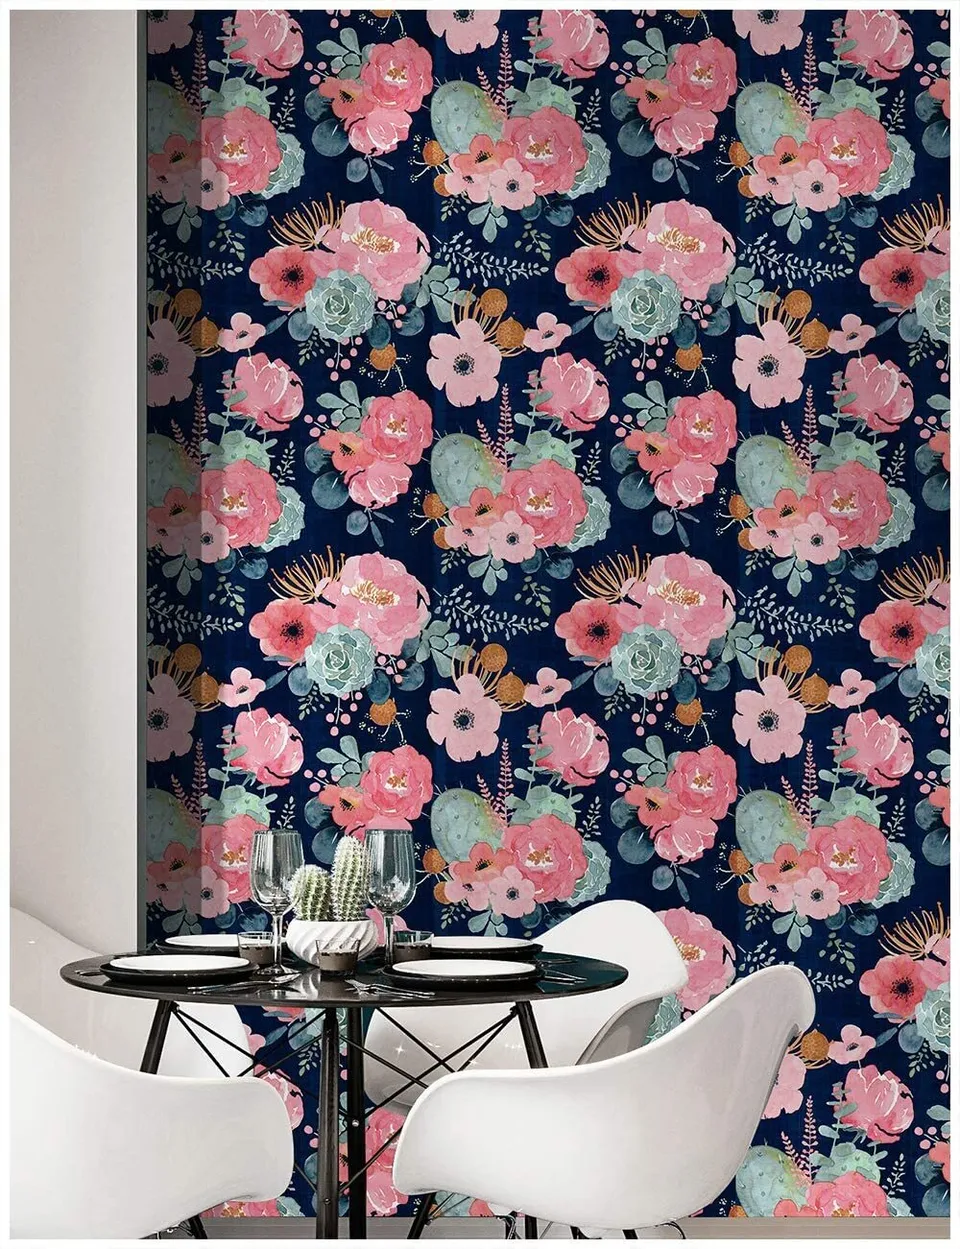 Misbruik onbekend beroerte Whimsical Peel-And-Stick Wallpapers To Brighten Up Your Home | HuffPost Life